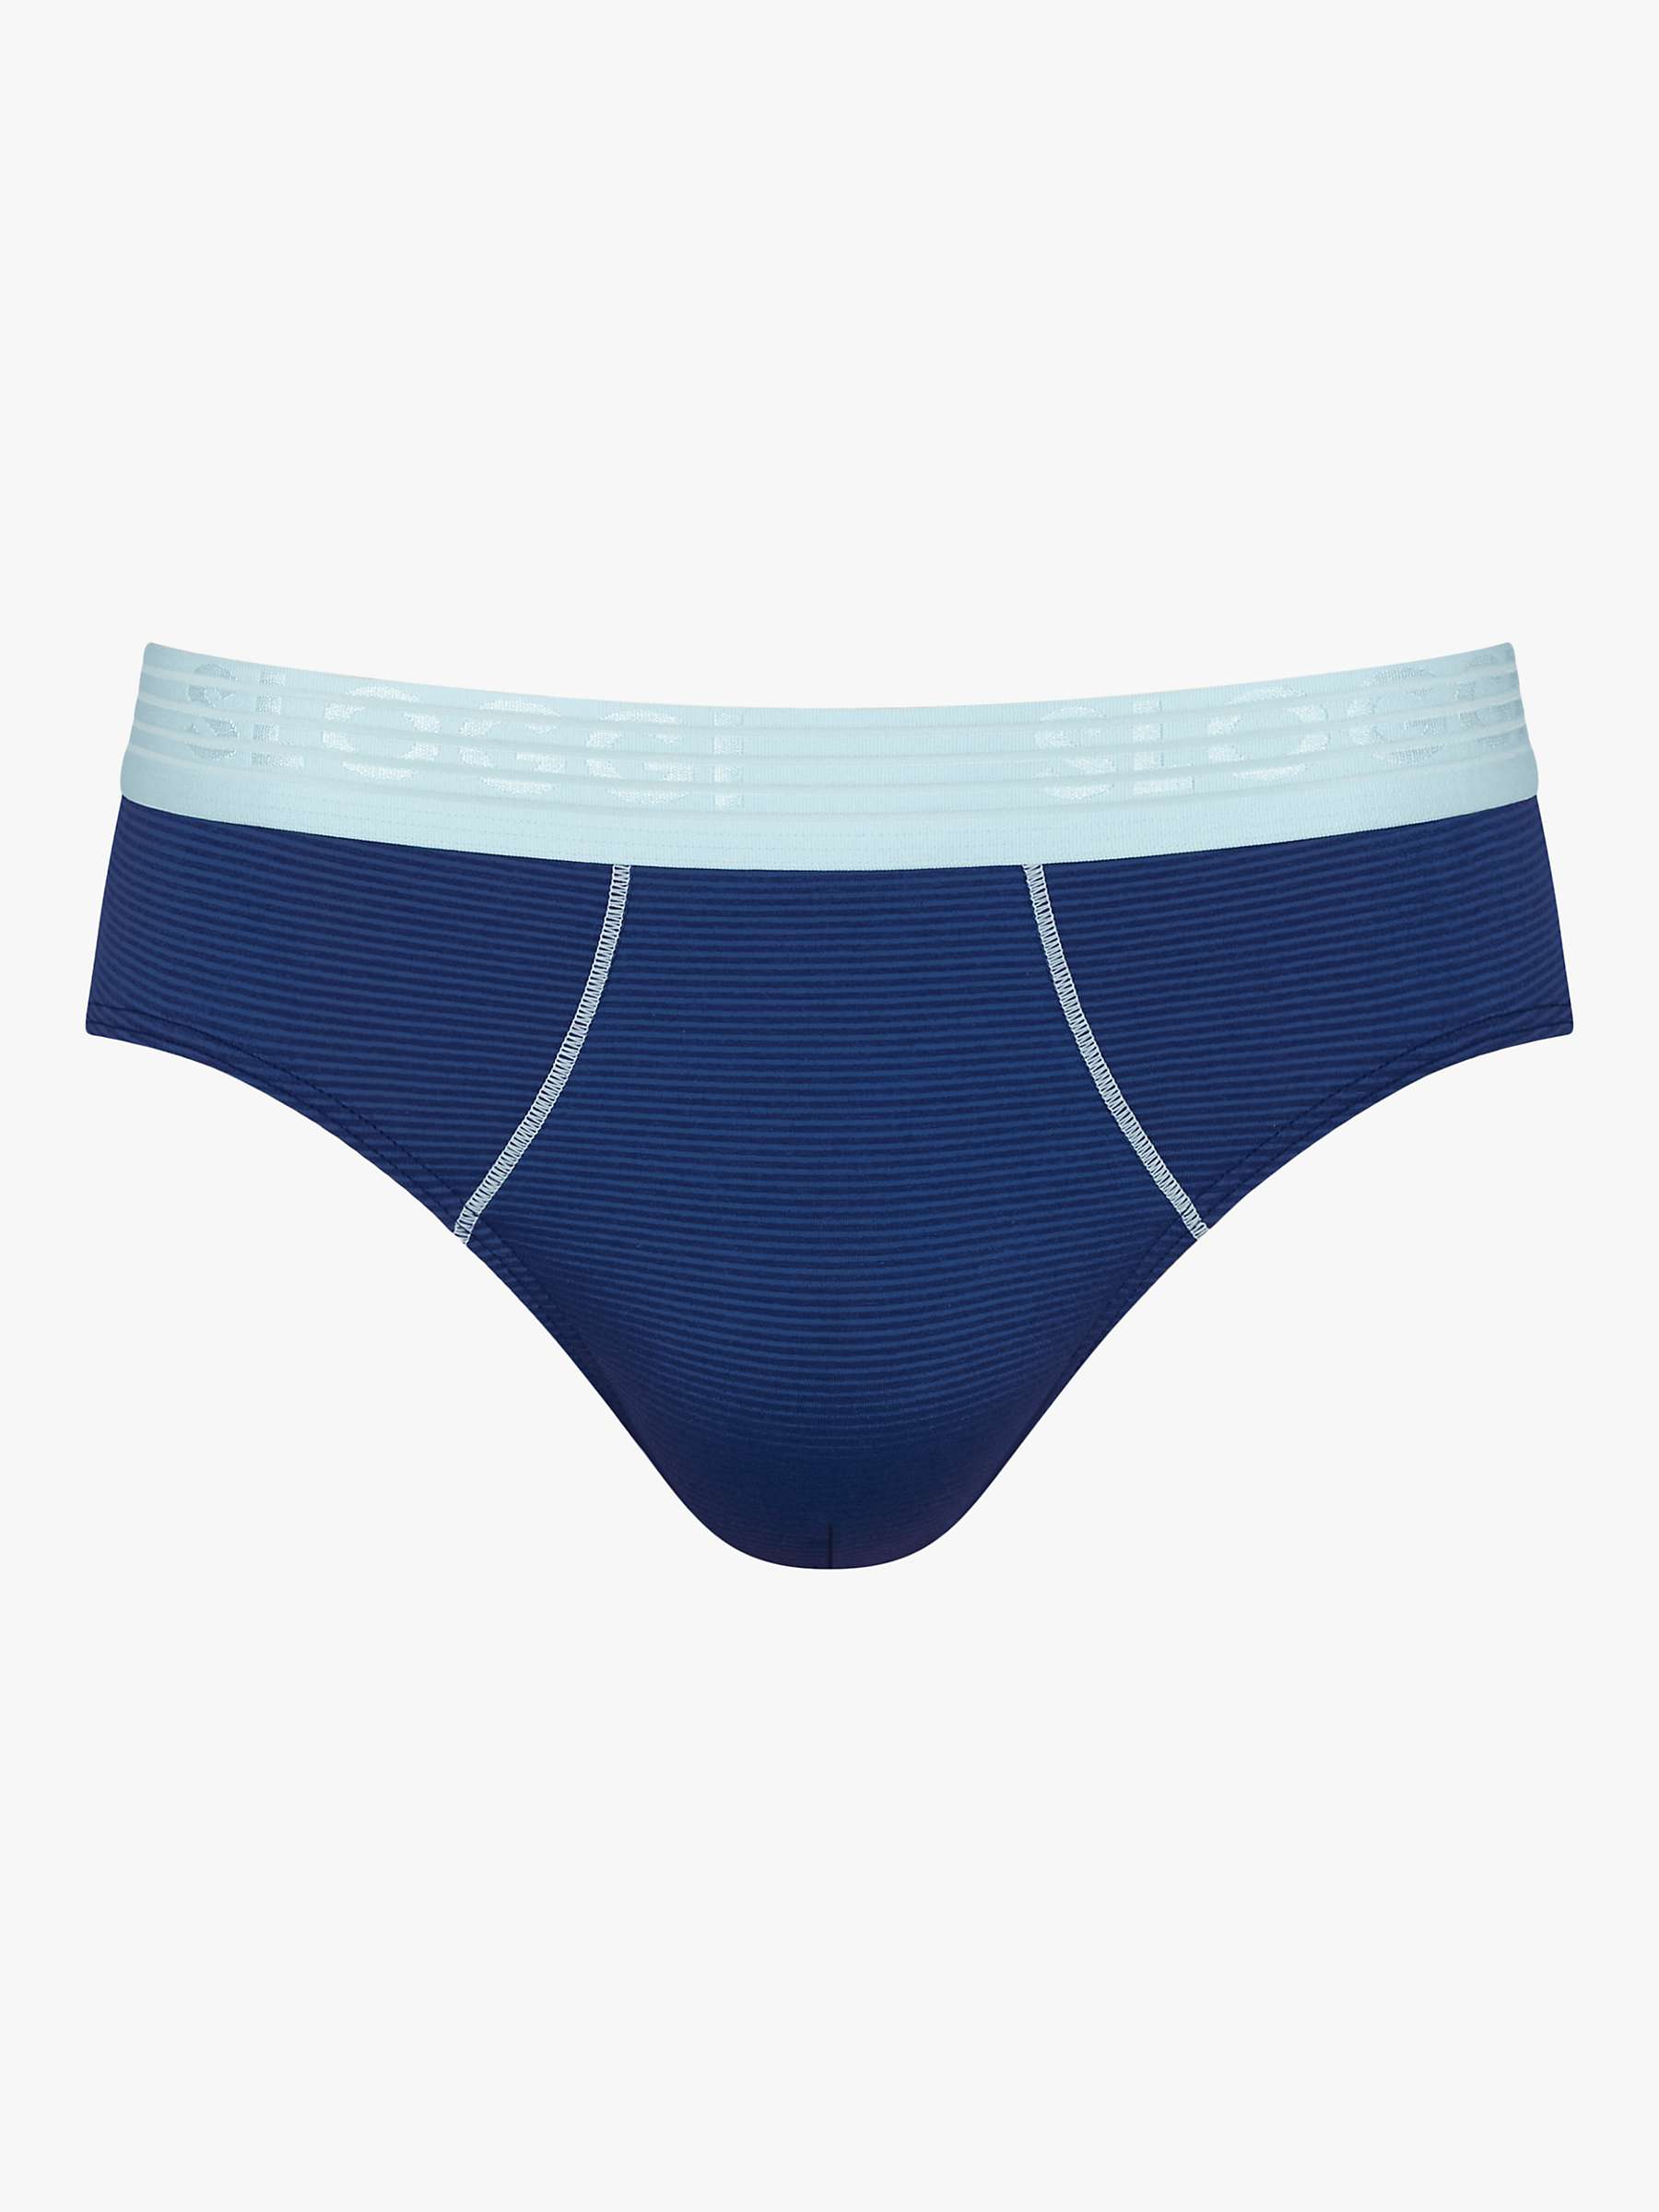 Buy sloggi EVER Cool Cotton Stretch Hipster Trunks, Pack of 2 Online at johnlewis.com